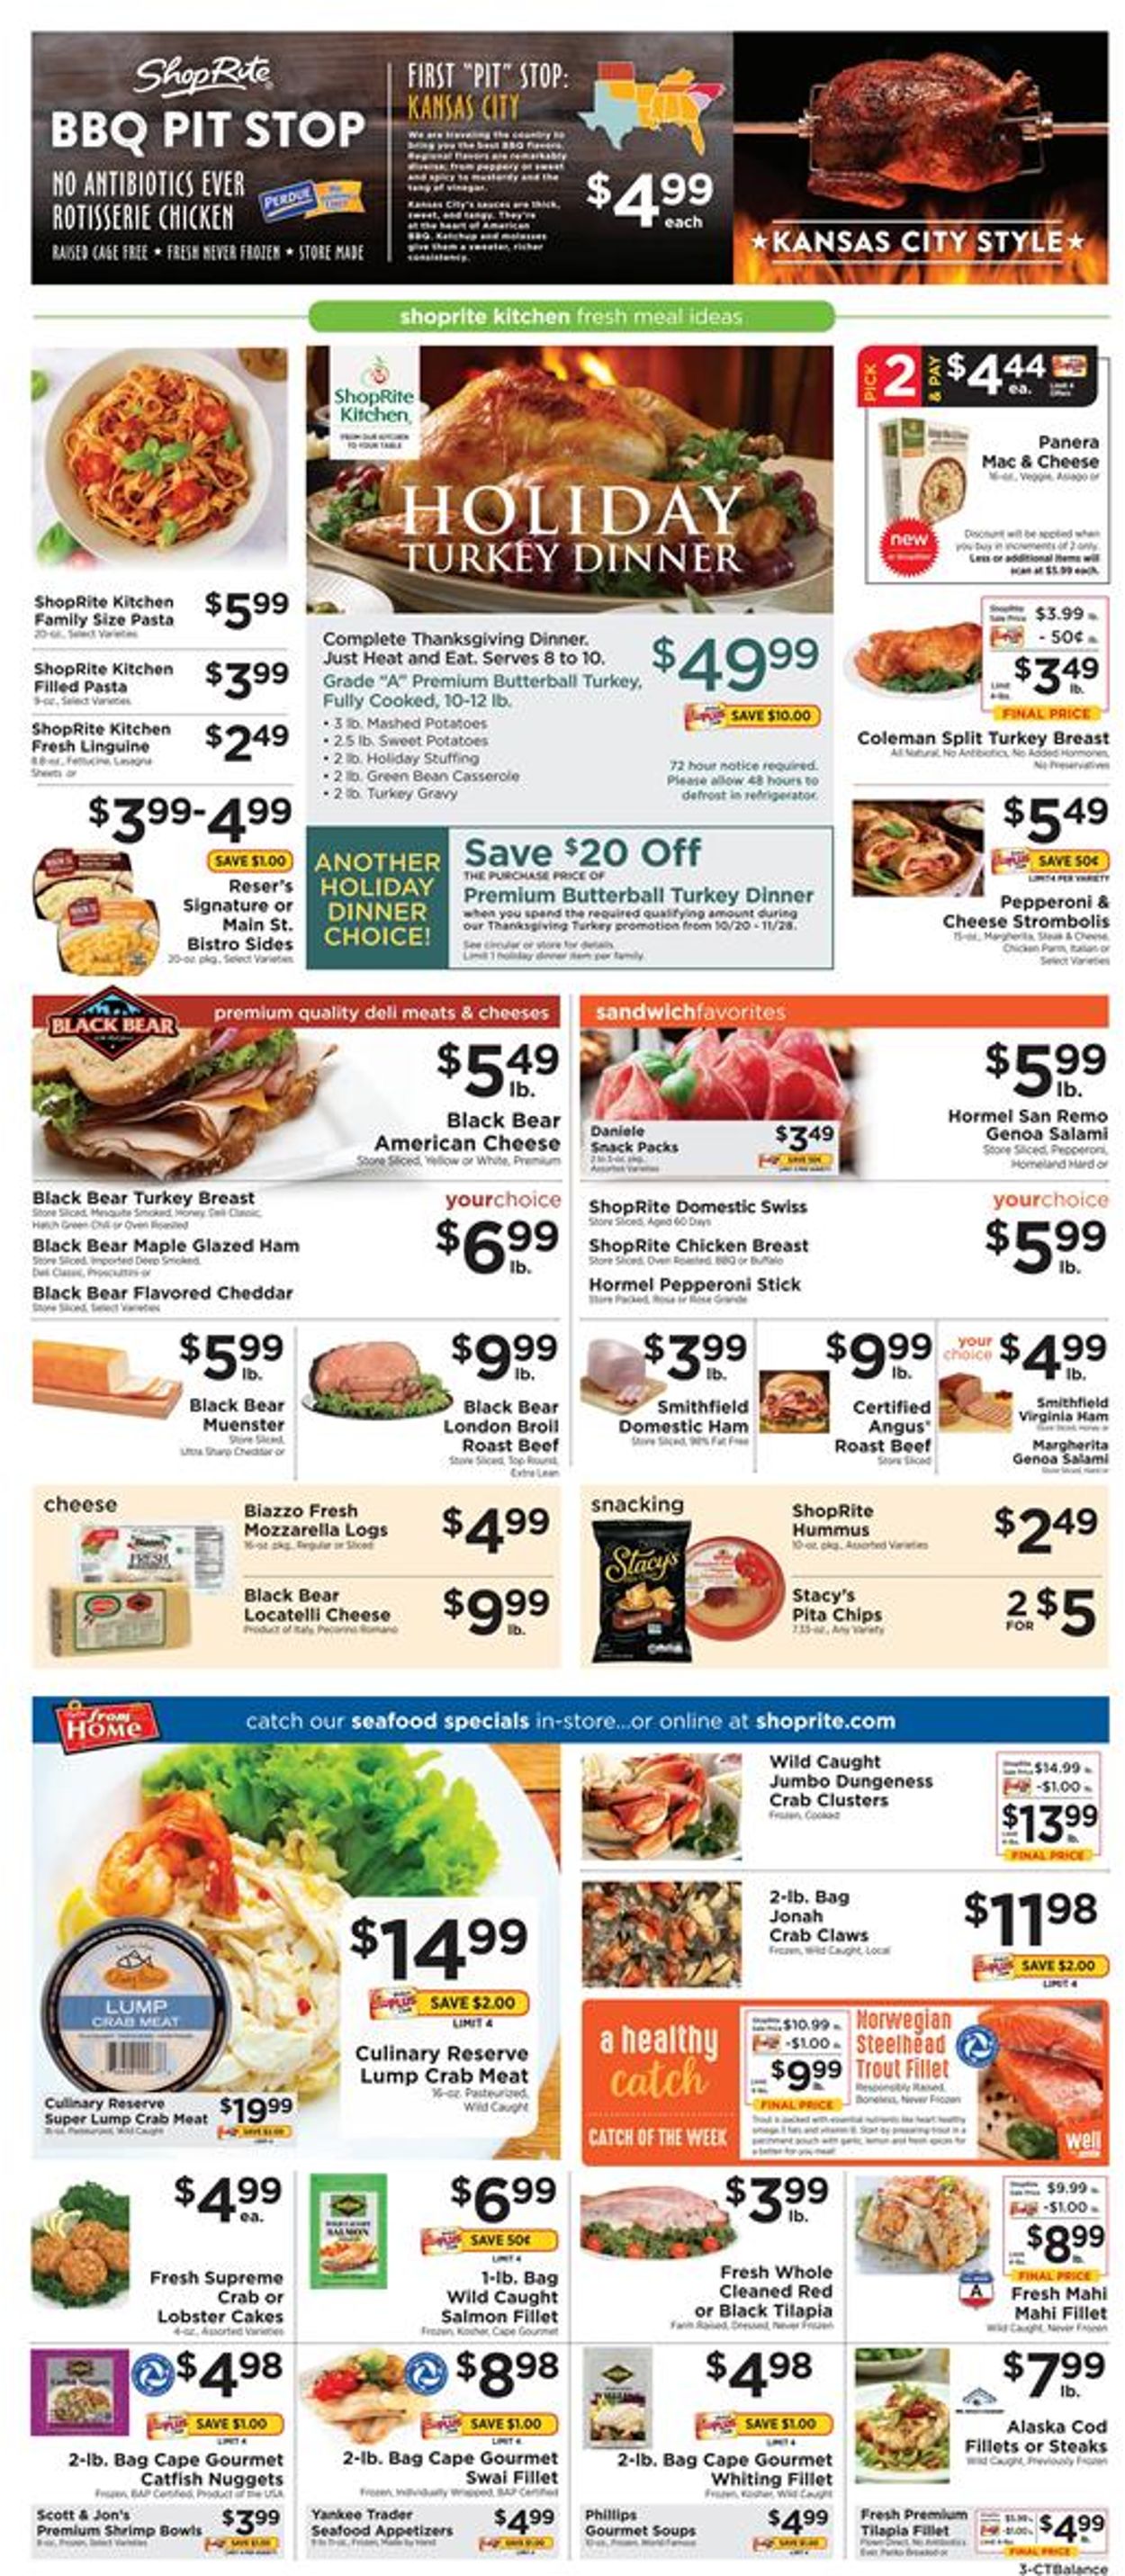 ShopRite Current weekly ad 11/03 - 11/09/2019 [3 ...